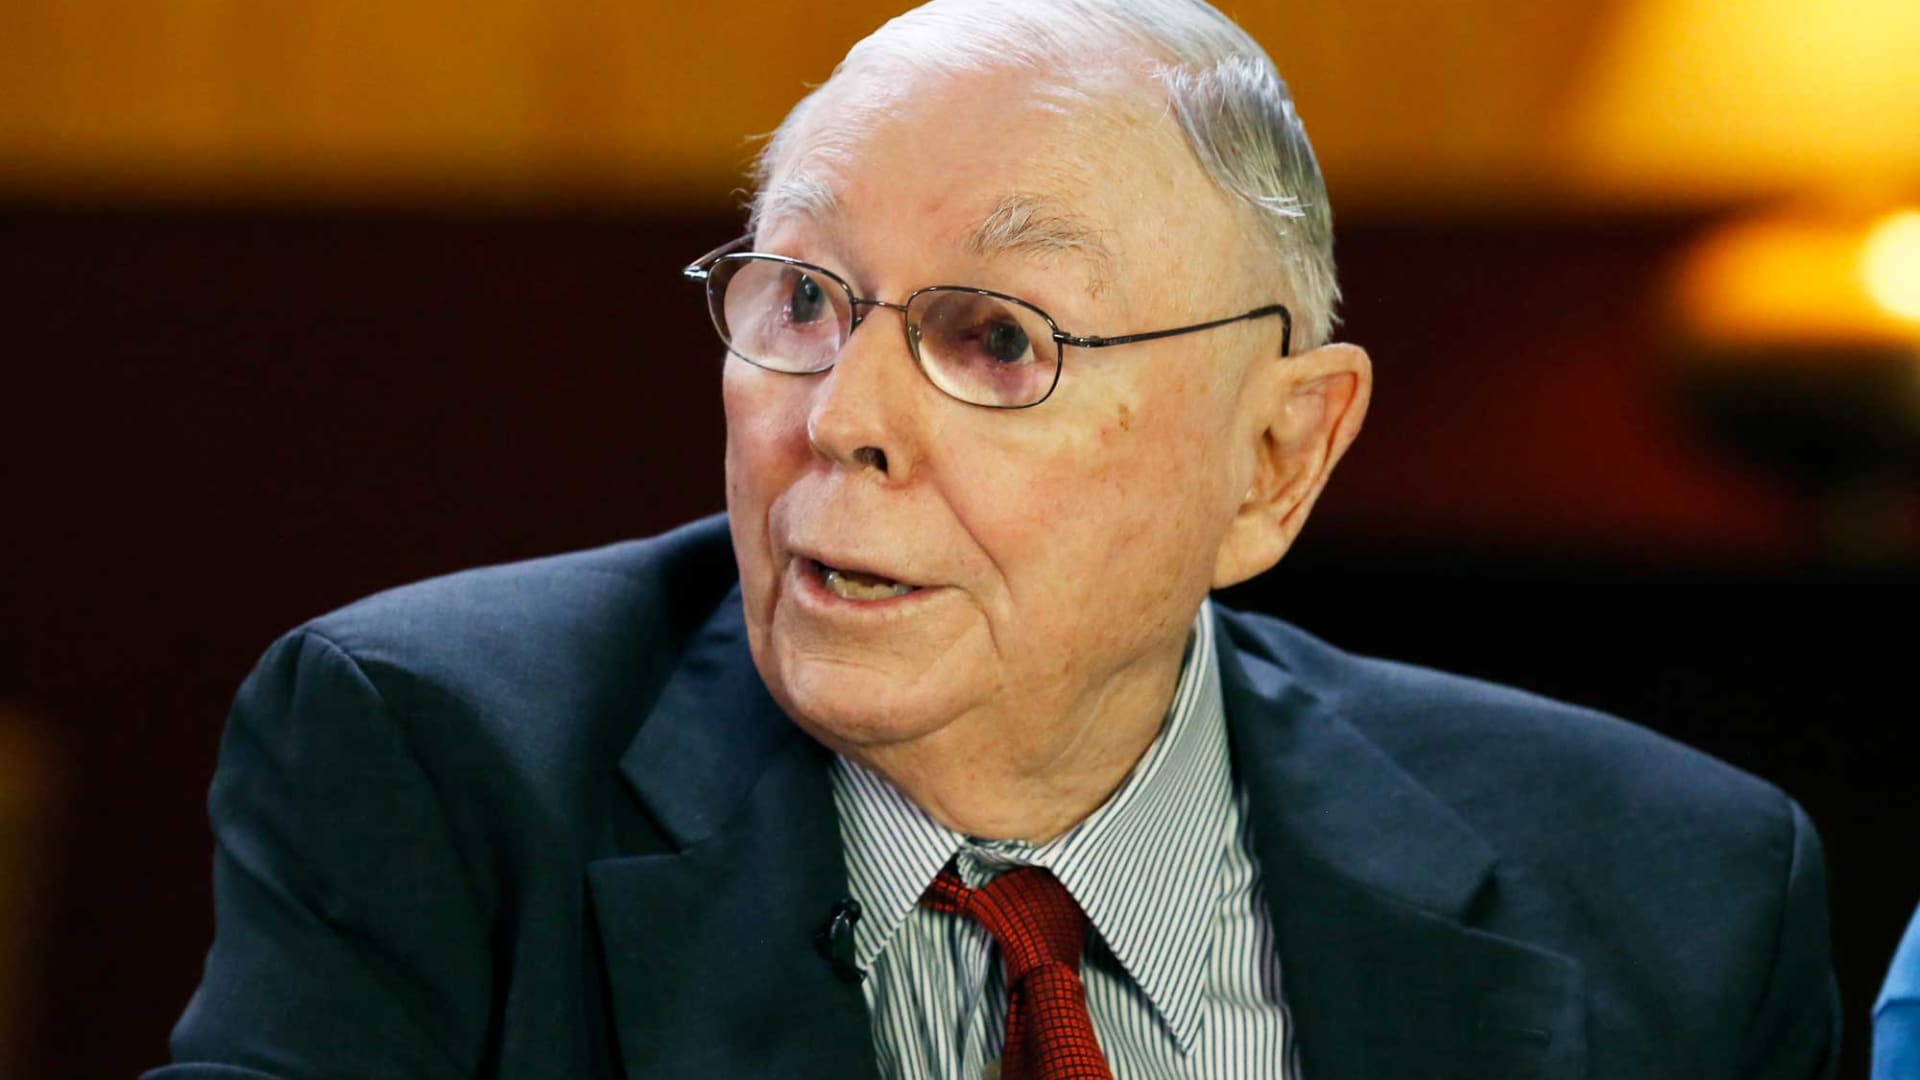 Charlie Munger warns there are 'lots of troubles coming' because of 'too much wretched excess'